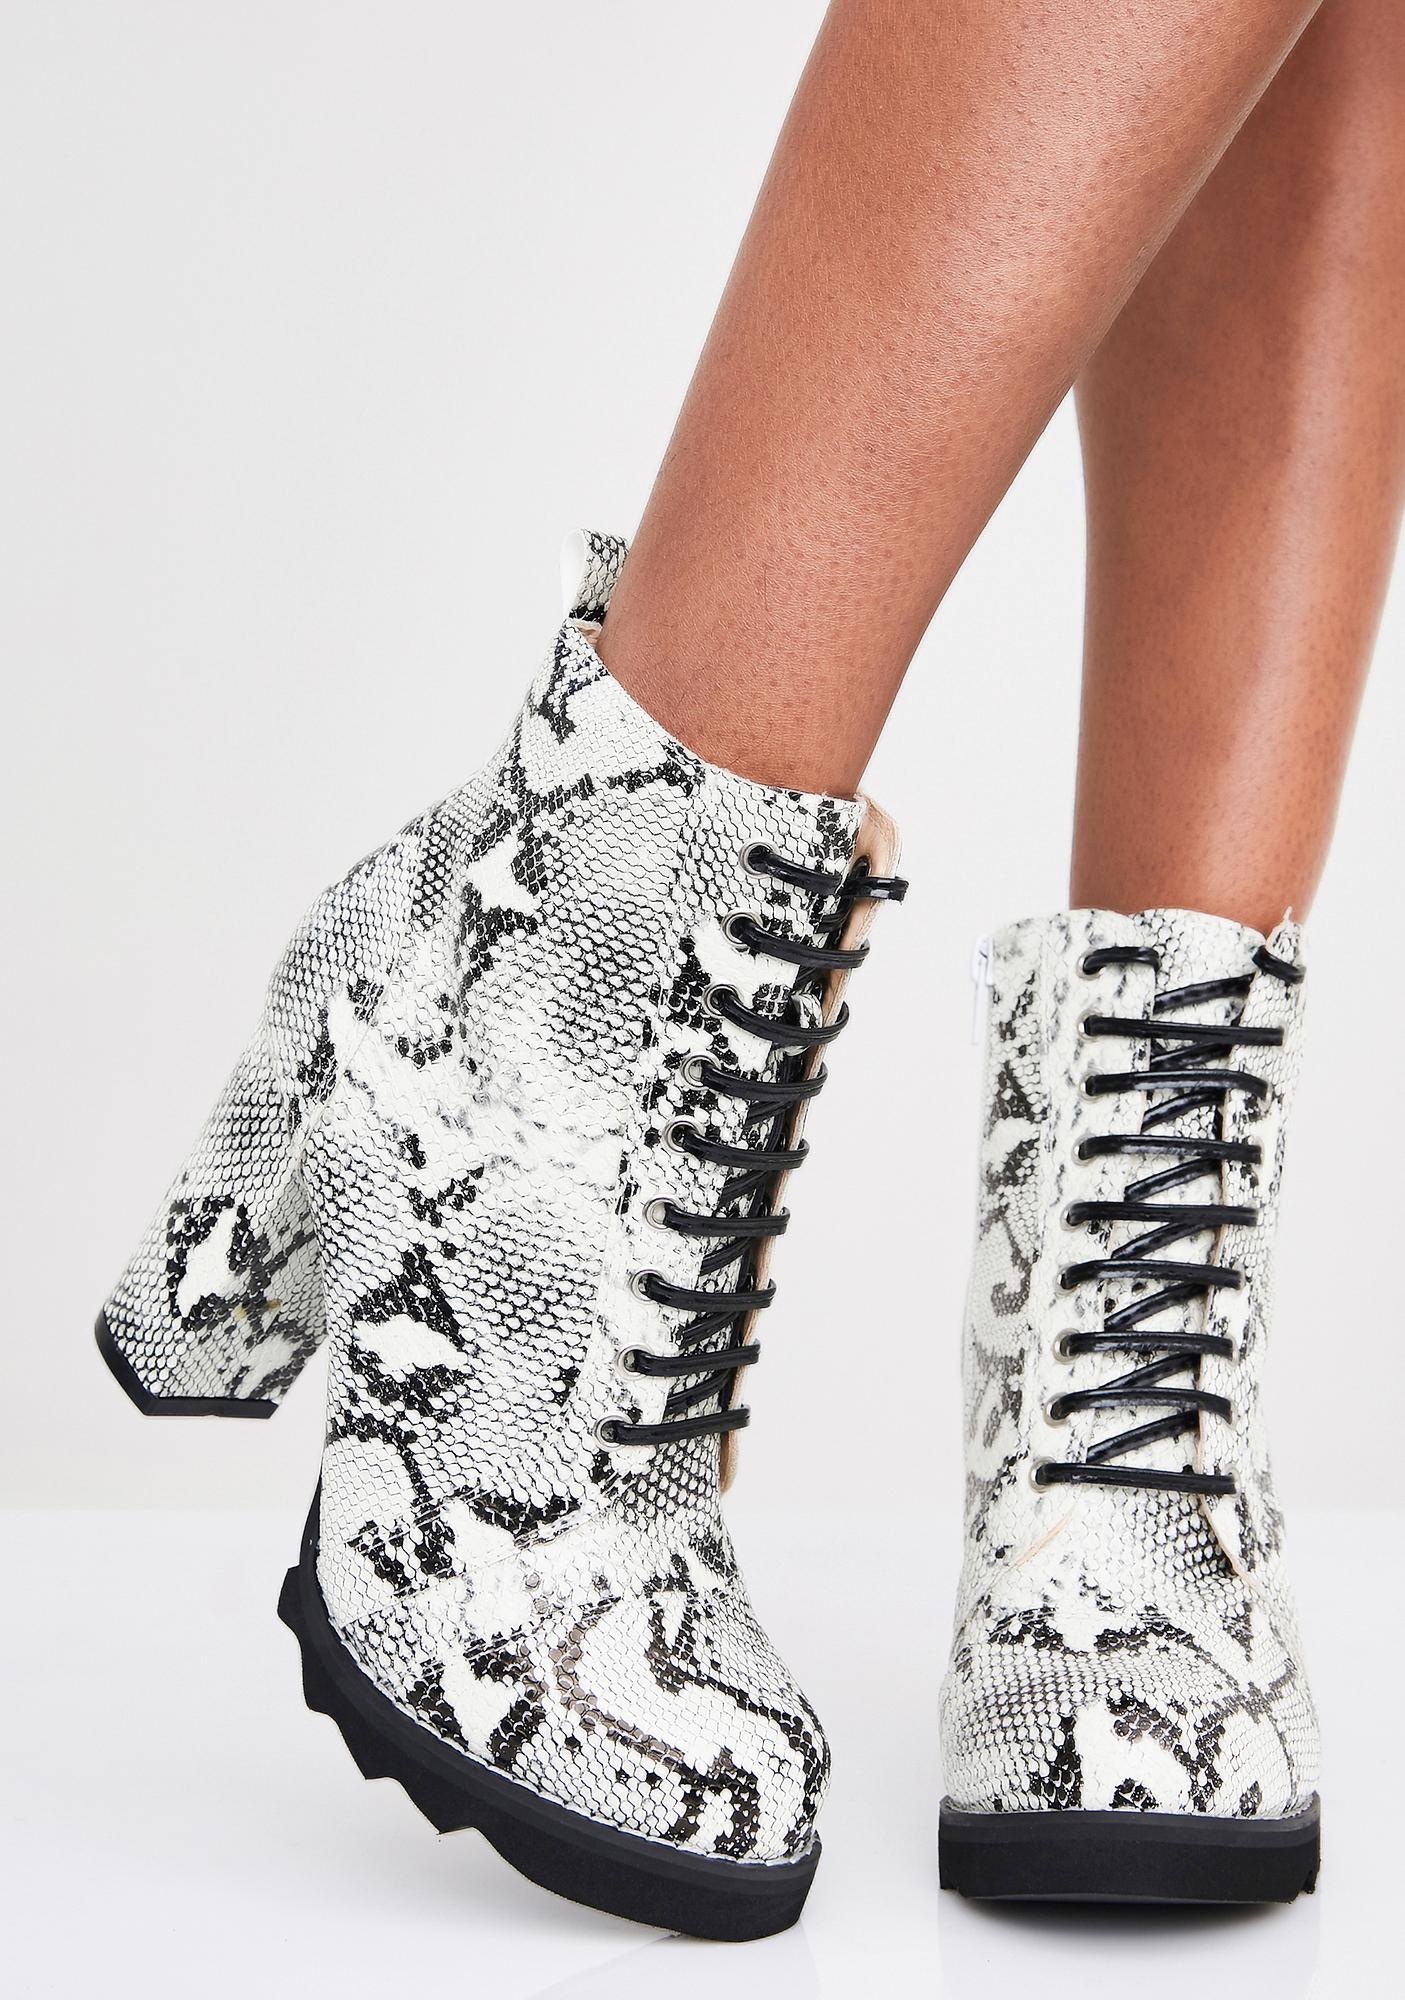 lace up snakeskin boots